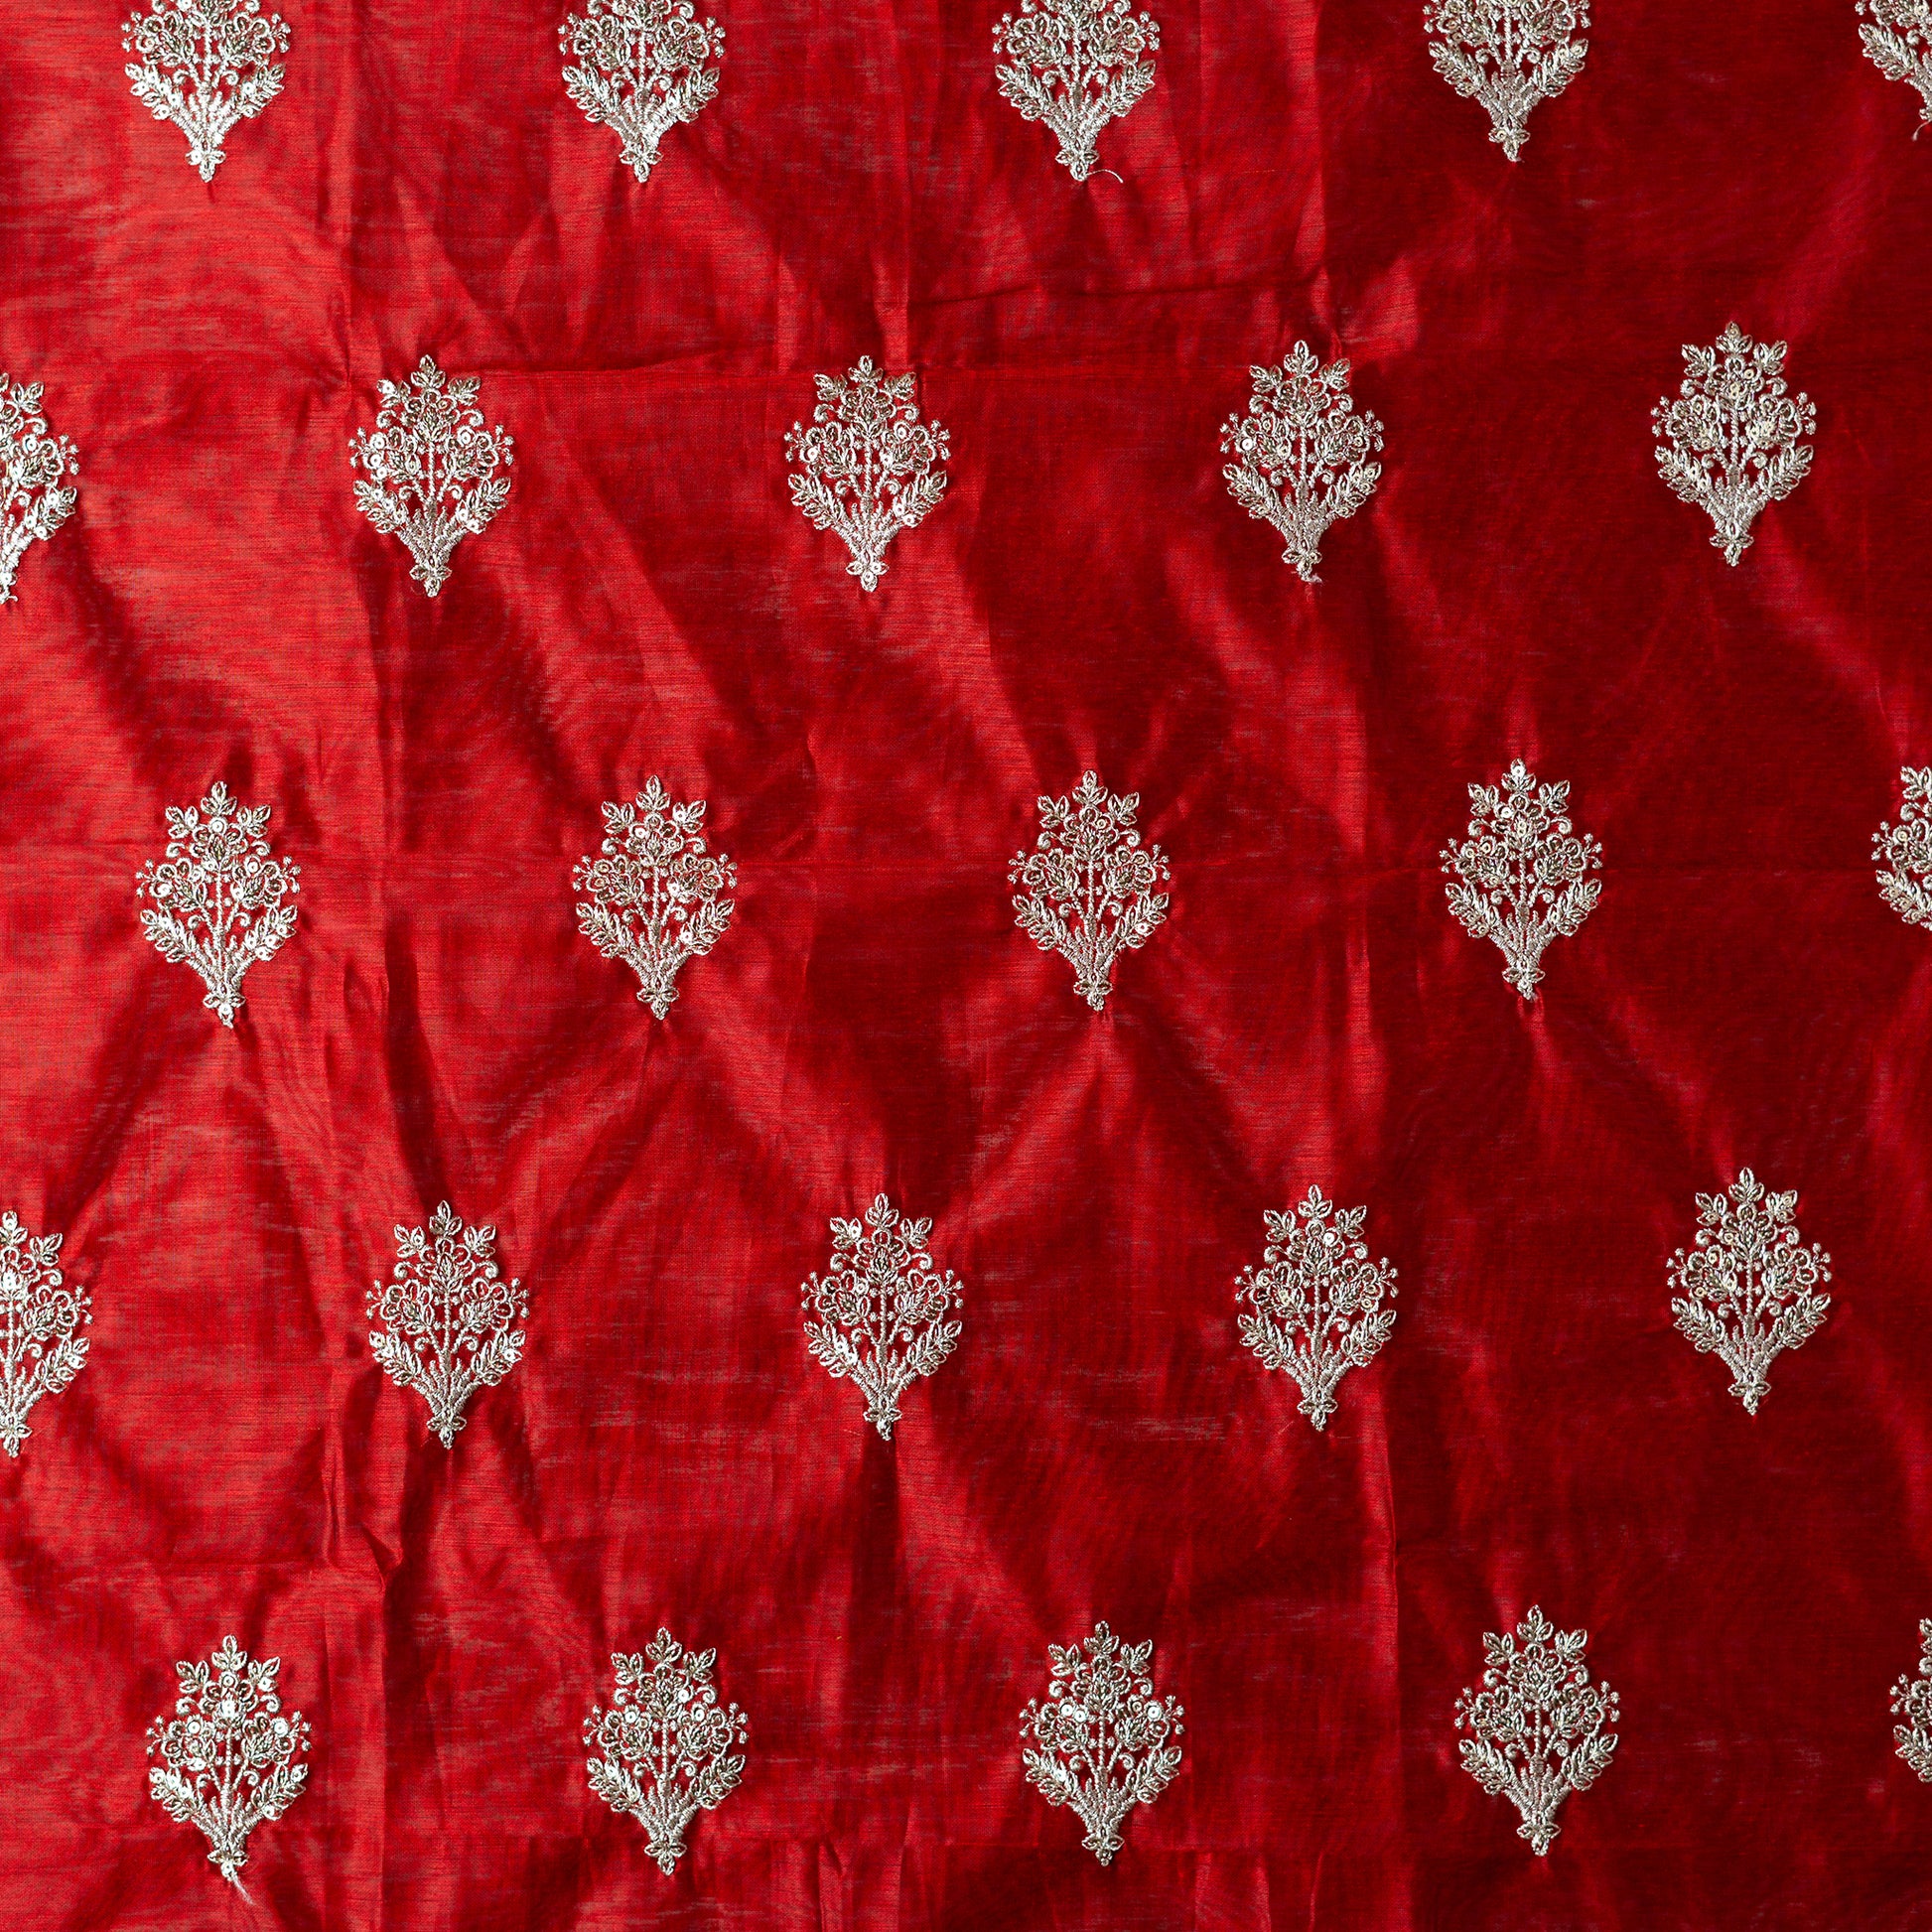 chanderi silk ethnic wear dress mateial in maroon color with silver color embroidery all over the body